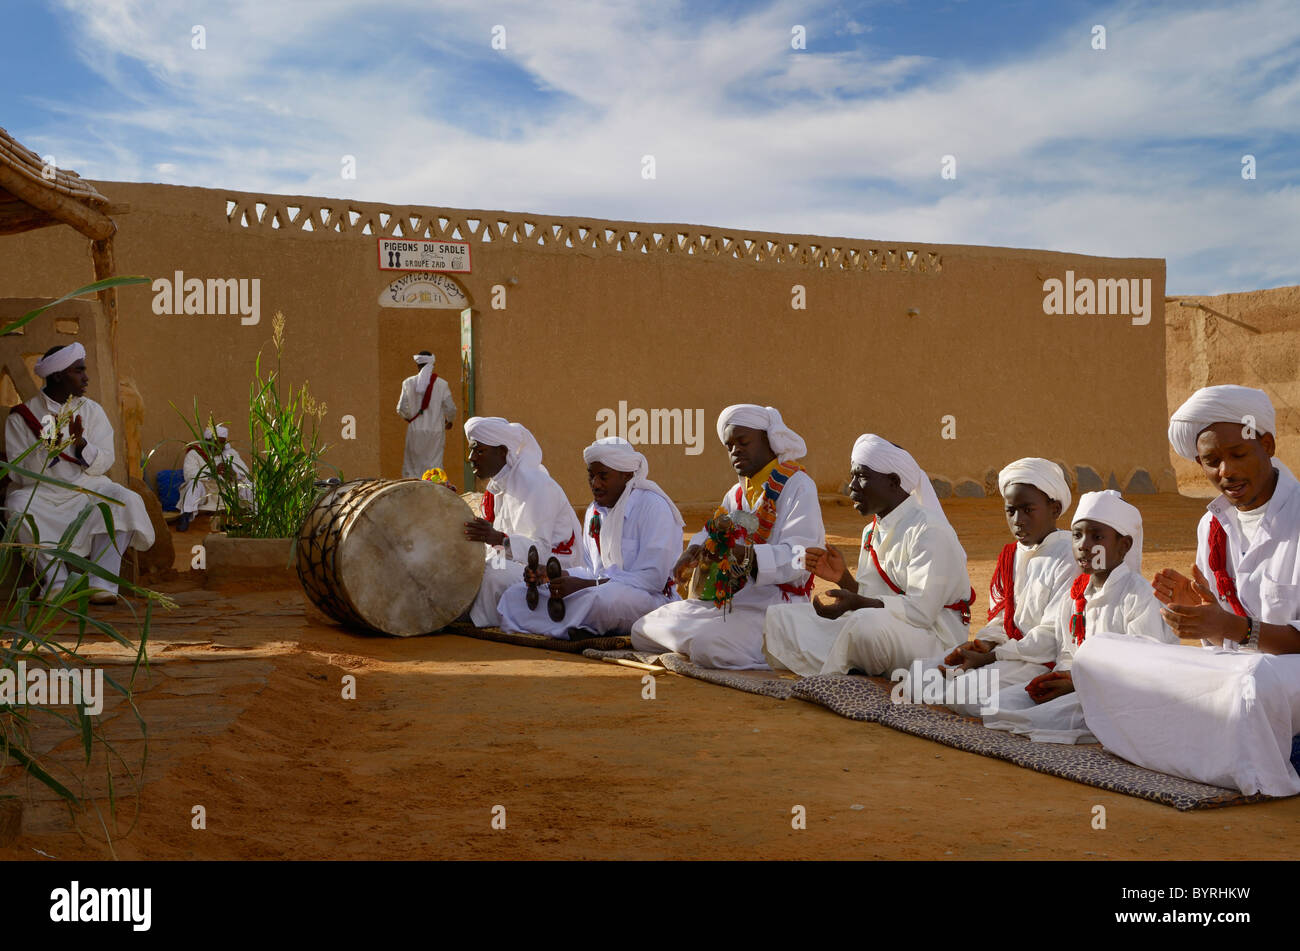 Group of Gnawa musicians in white turbans and jellabas sitting and playing music in Khemliya village Morocco North Africa Stock Photo